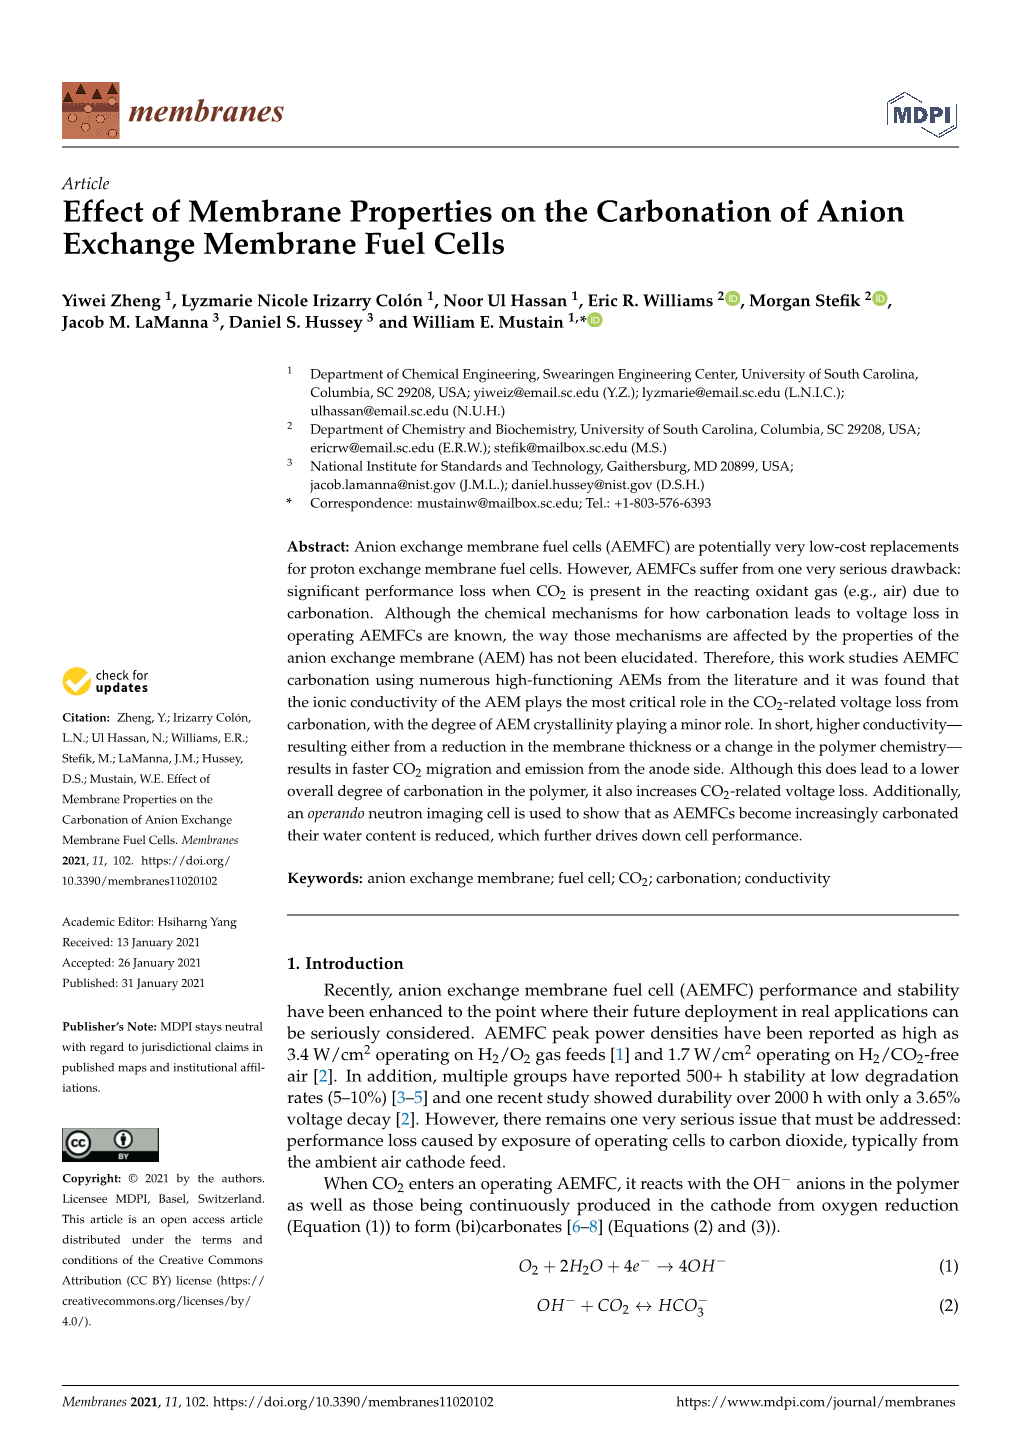 Effect of Membrane Properties on the Carbonation of Anion Exchange Membrane Fuel Cells